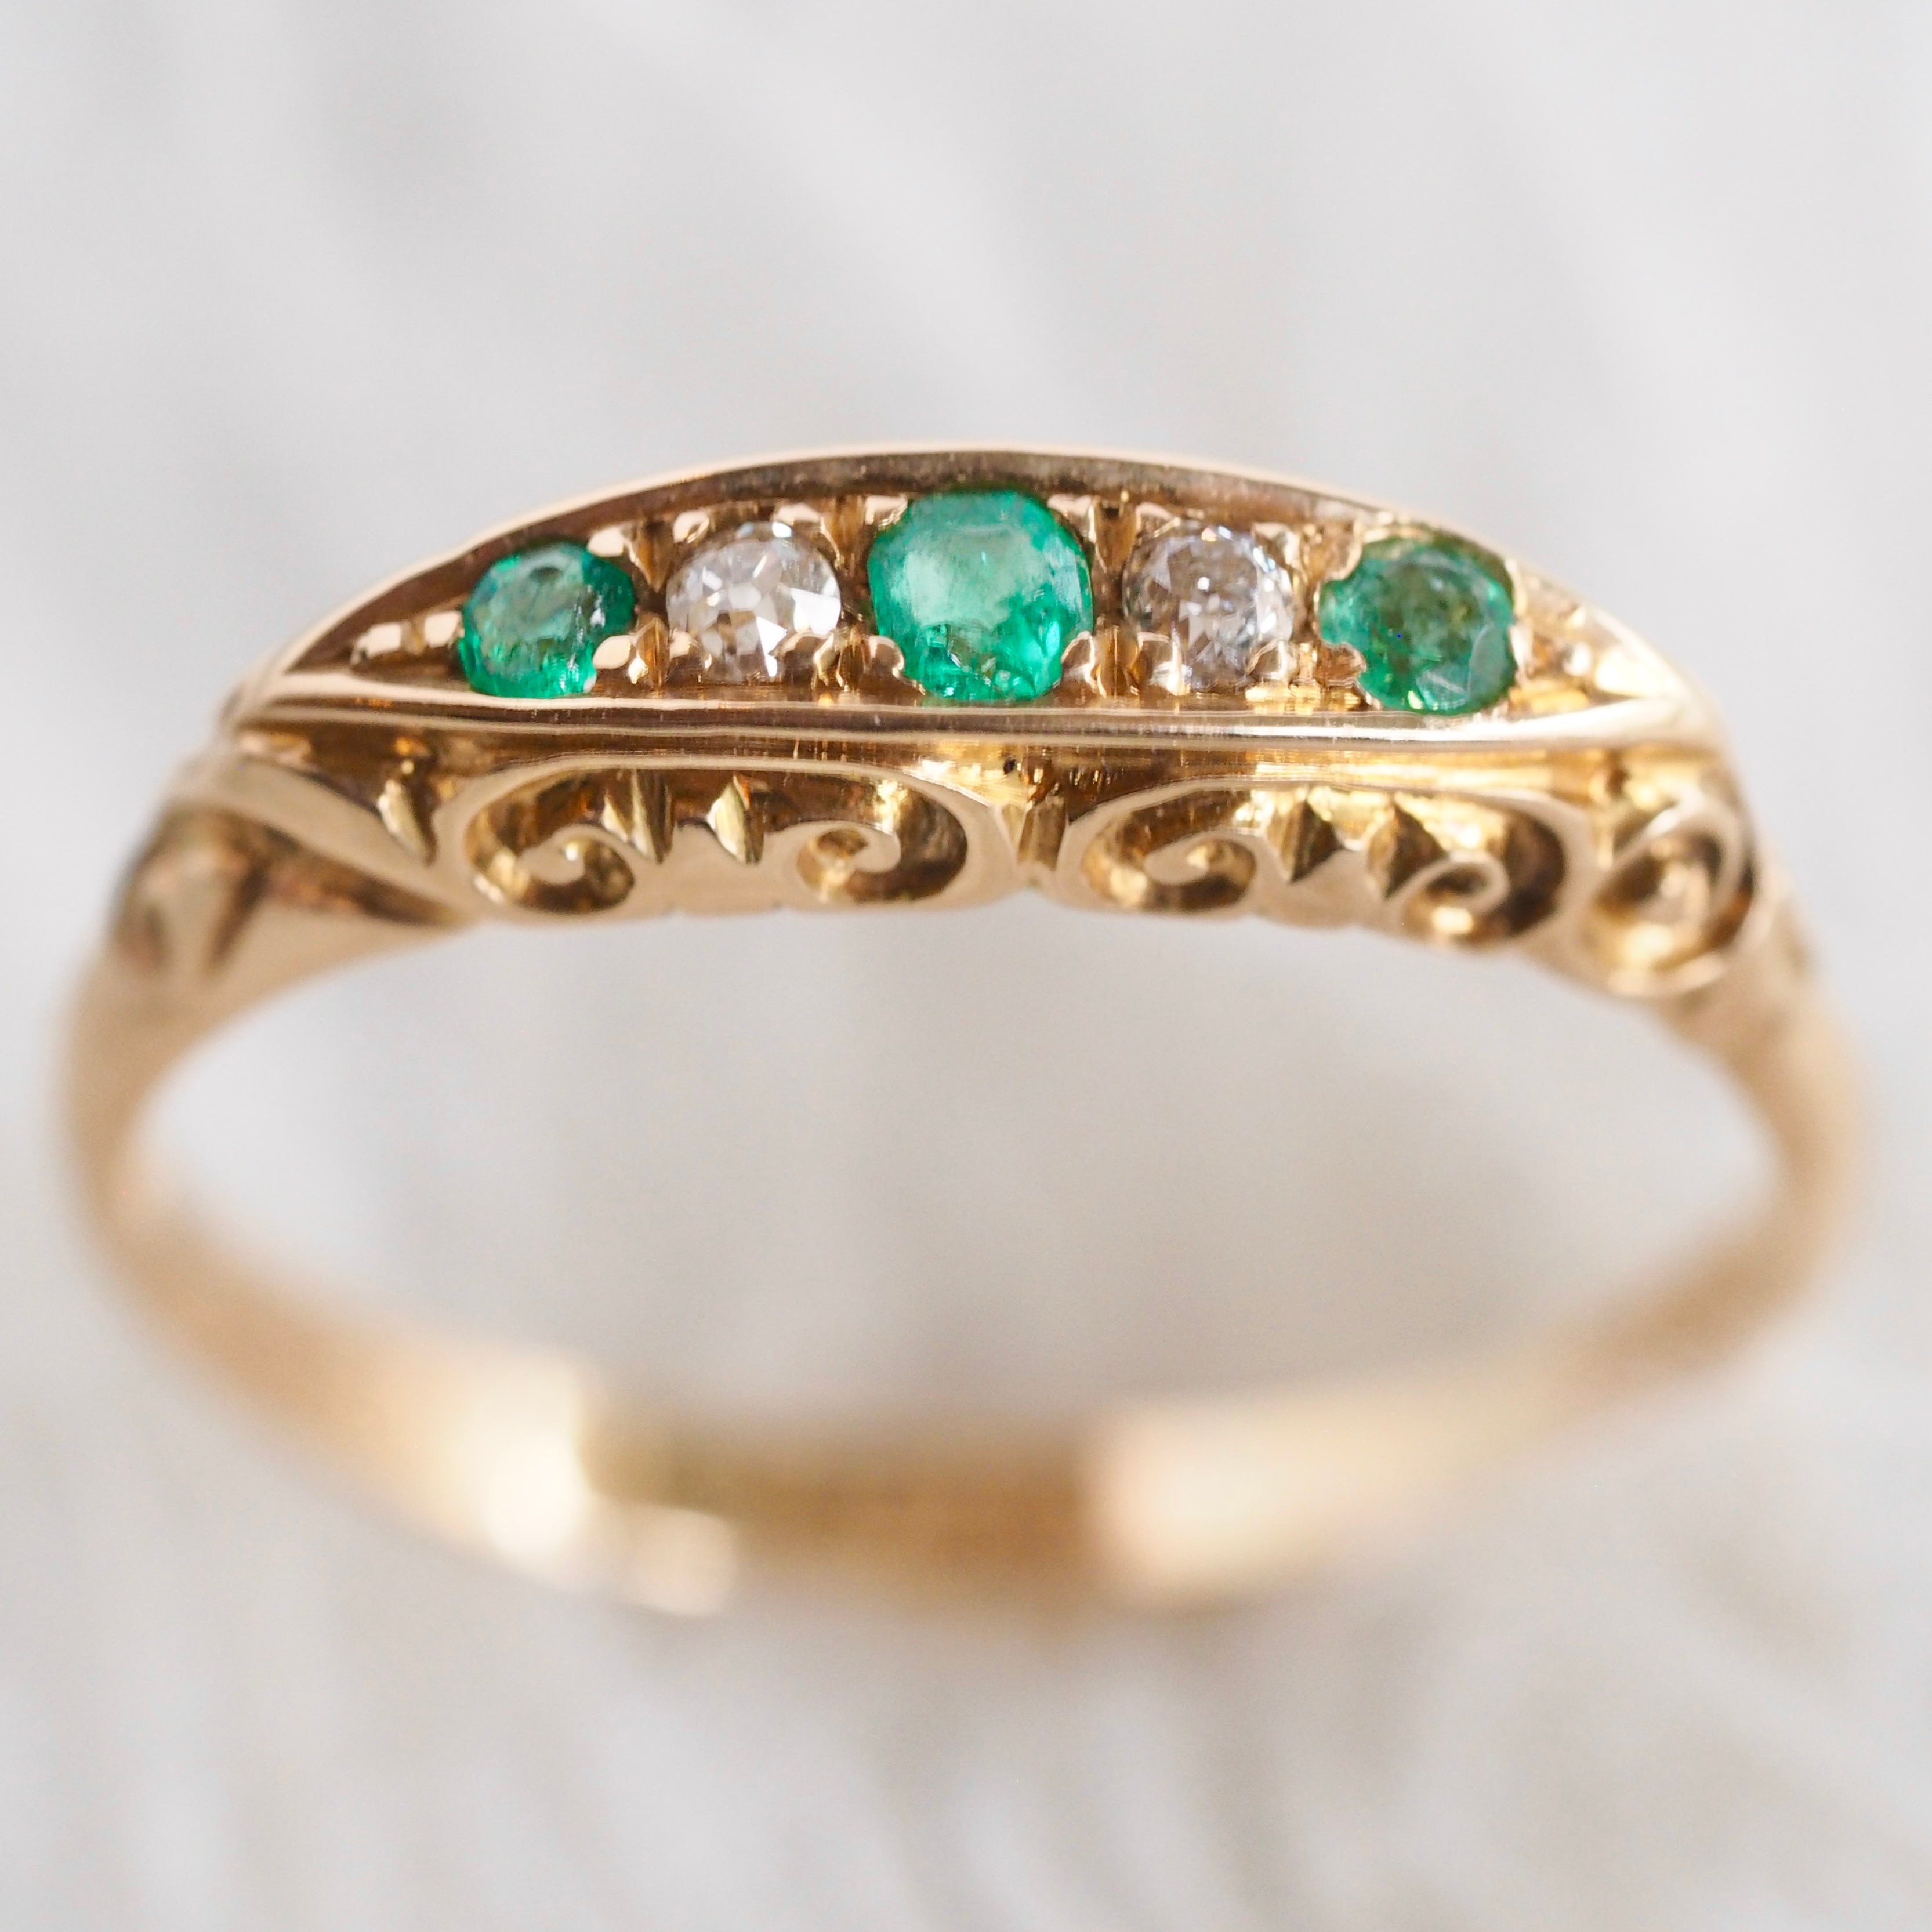 Antique Edwardian 18k Gold Emerald and Old Mine Cut Diamond Ring